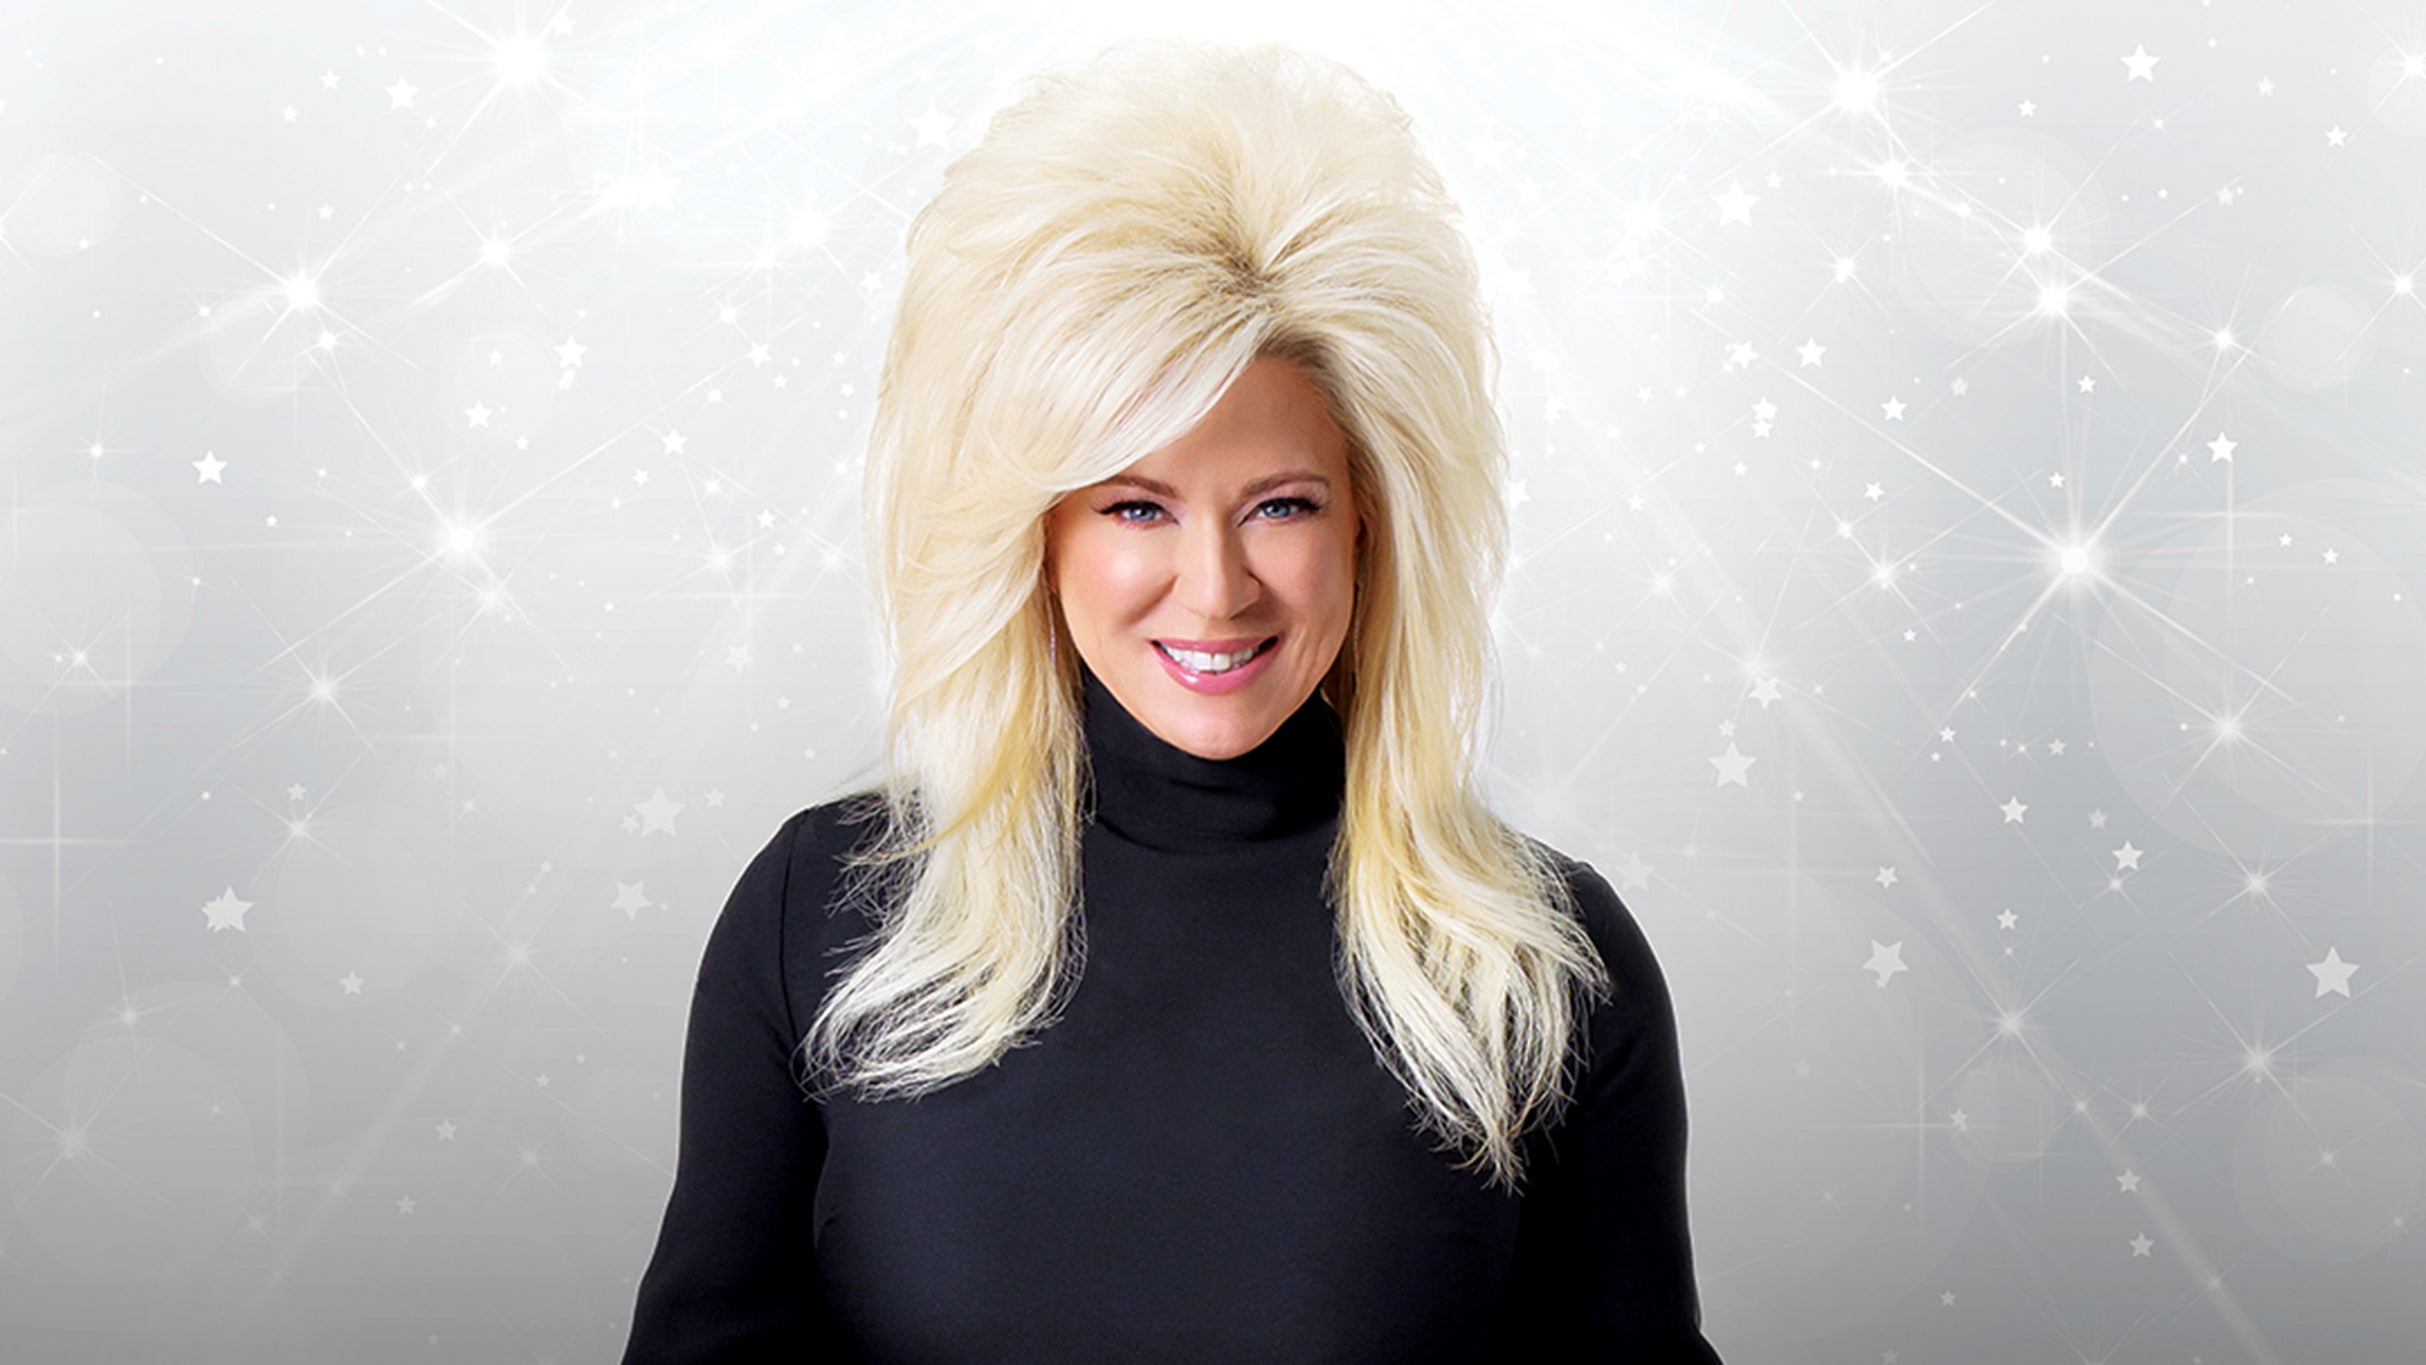 Theresa Caputo Live! The Experience in Bethlehem promo photo for Music Insiders Club presale offer code